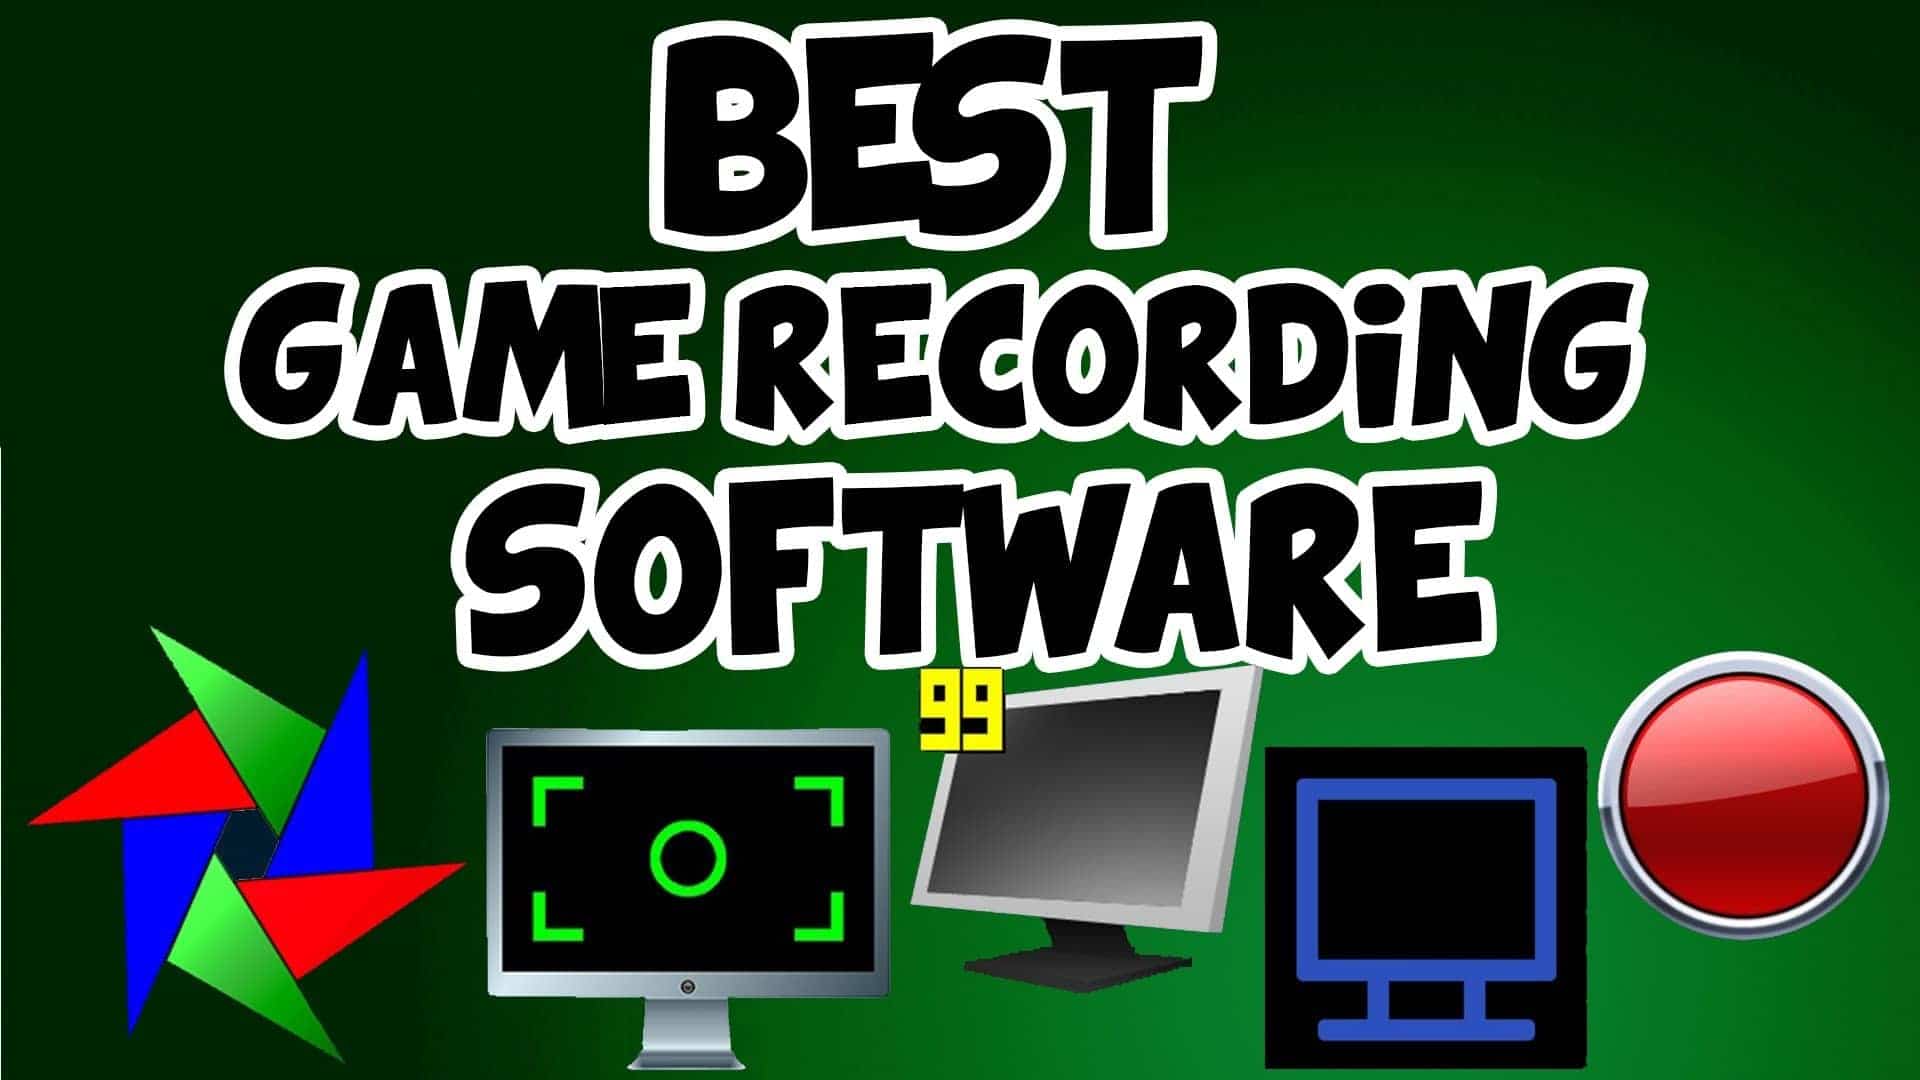 Game Recording Software